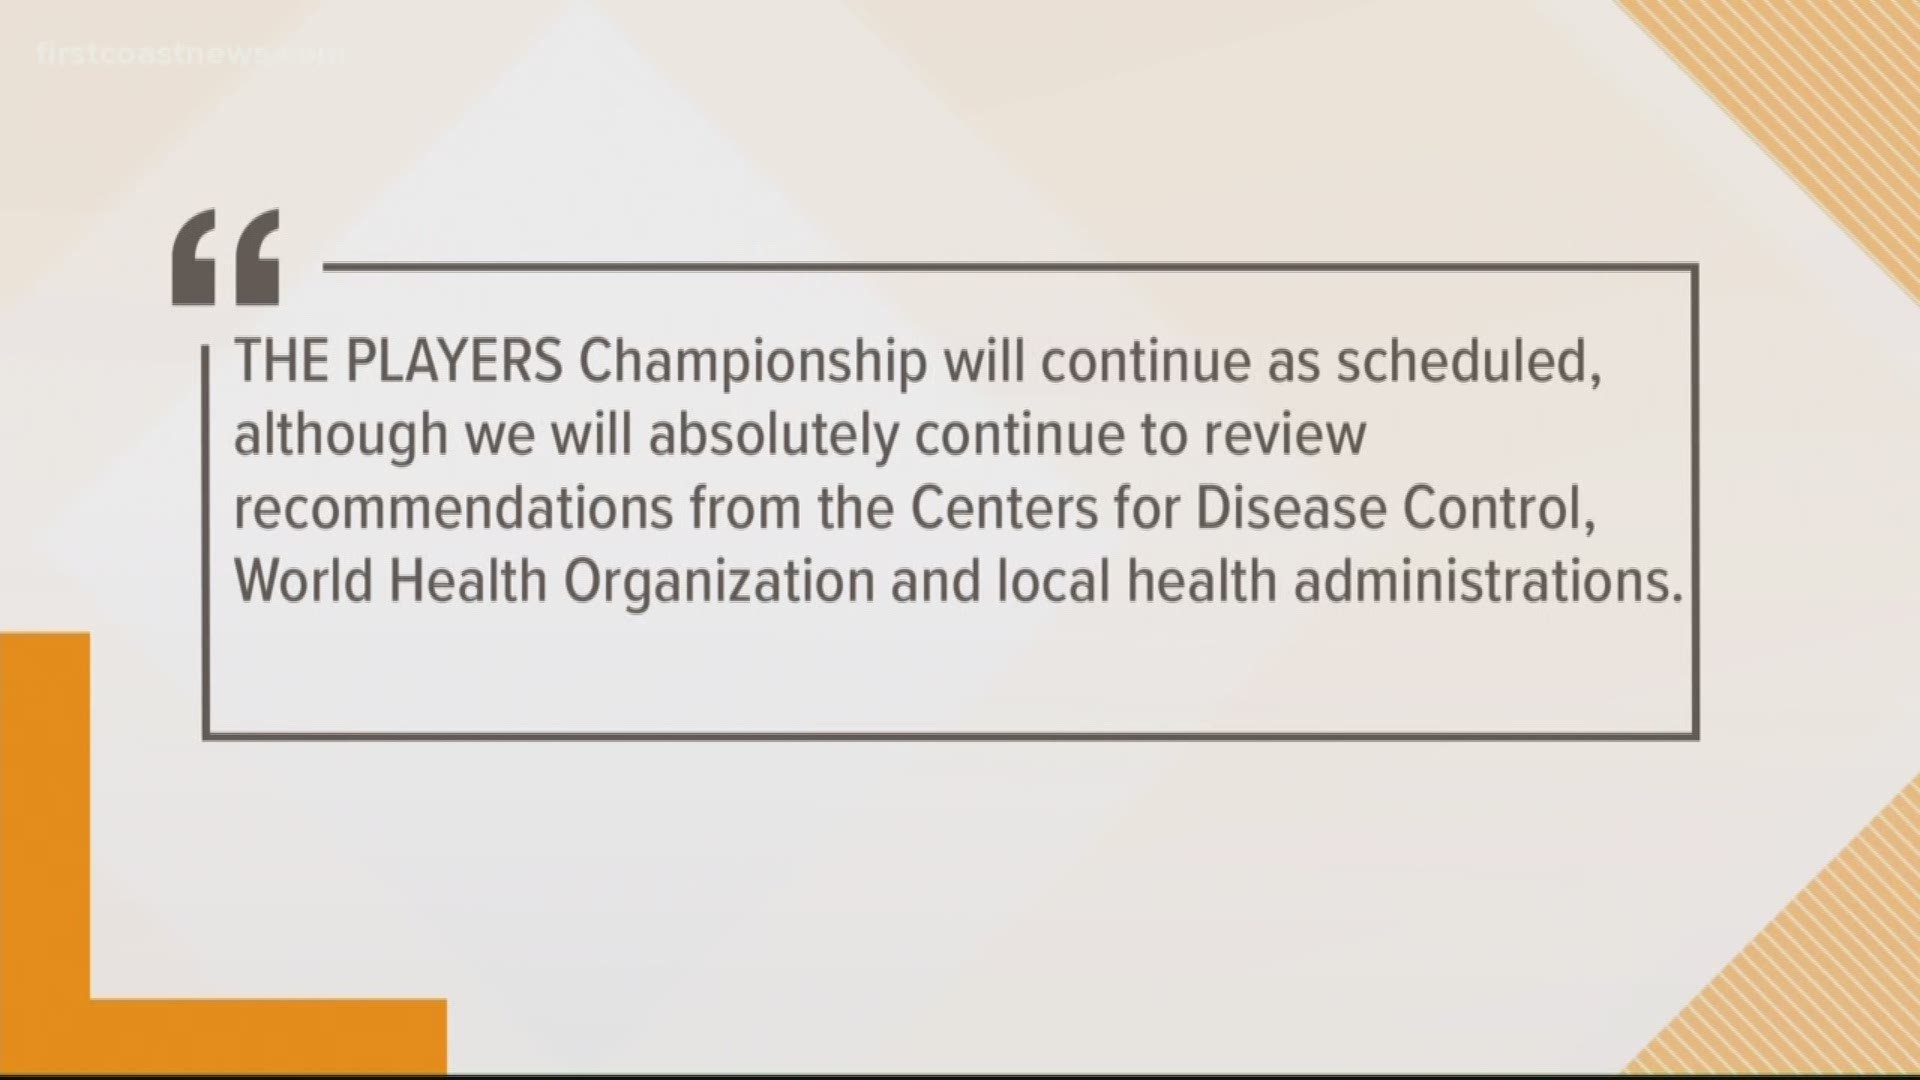 The PGA Tour said it will review recommendations from the Centers for Disease Control, the World Health Organization and local health administrations.